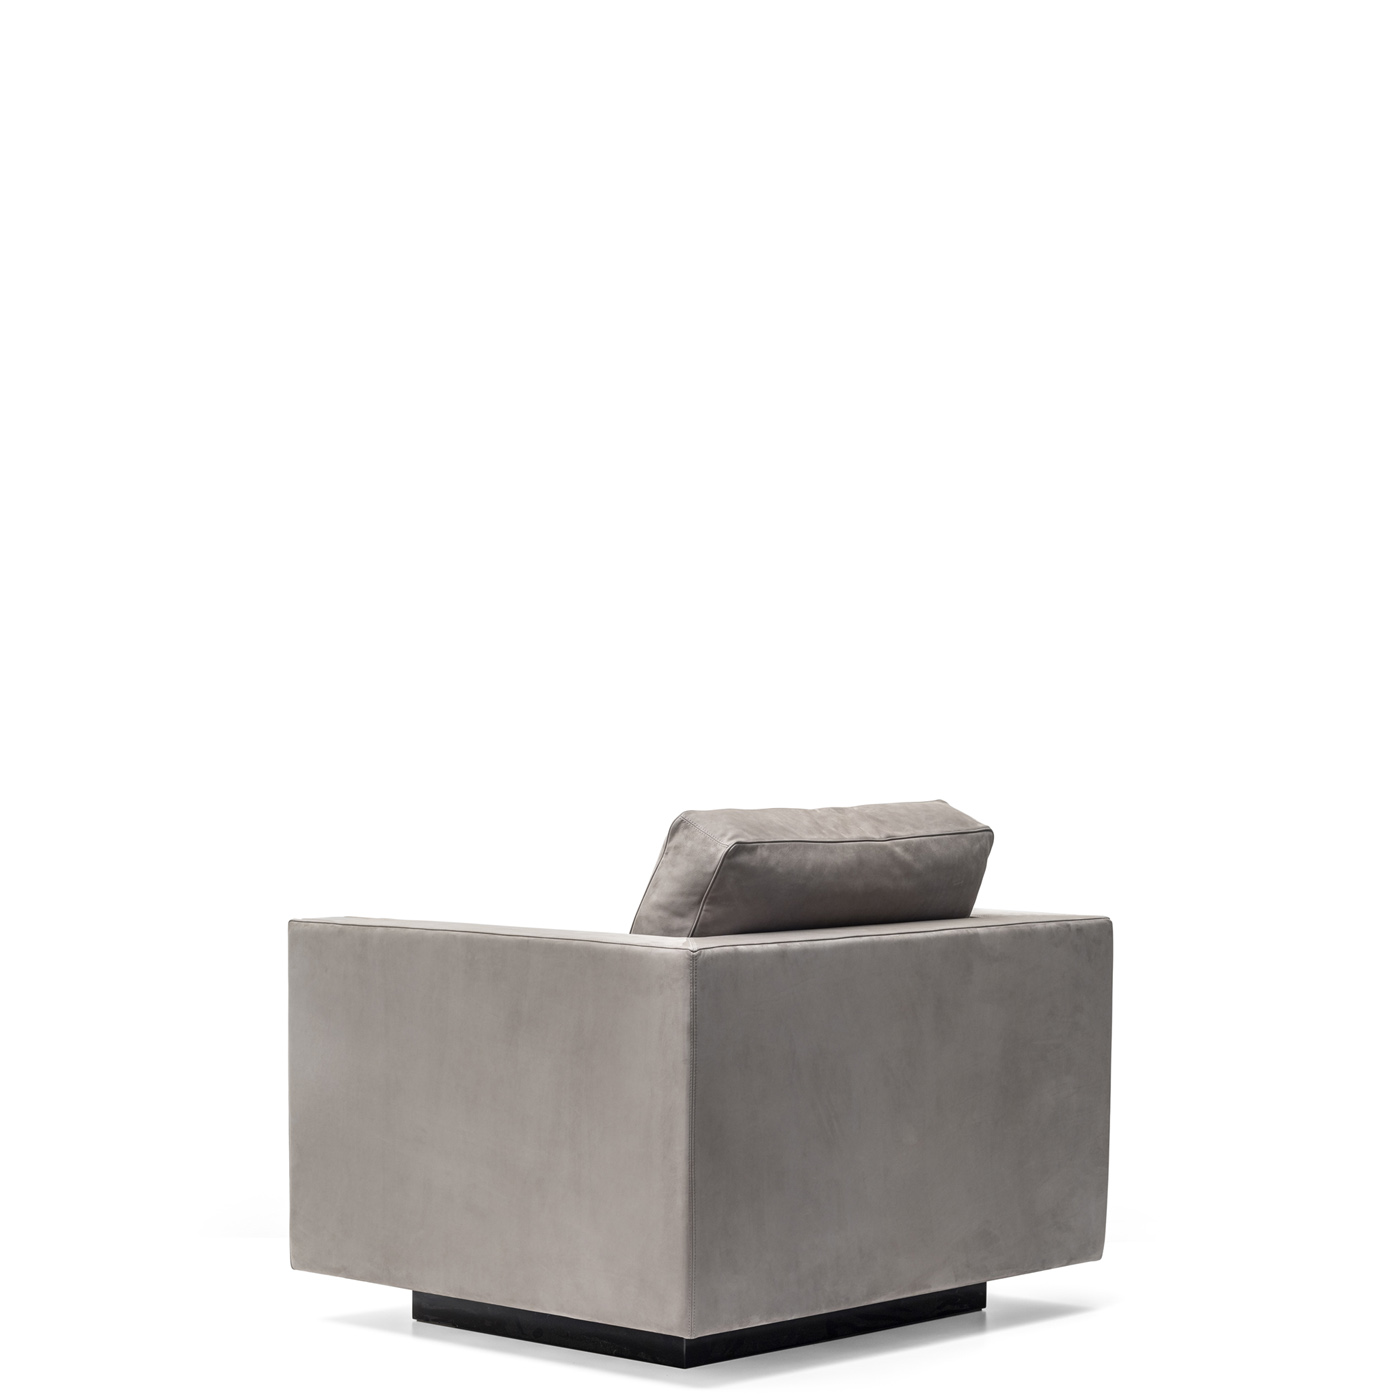 Sofas and seats - Zeus armchair in nabuk leather with armrests in horn - back - Arcahorn